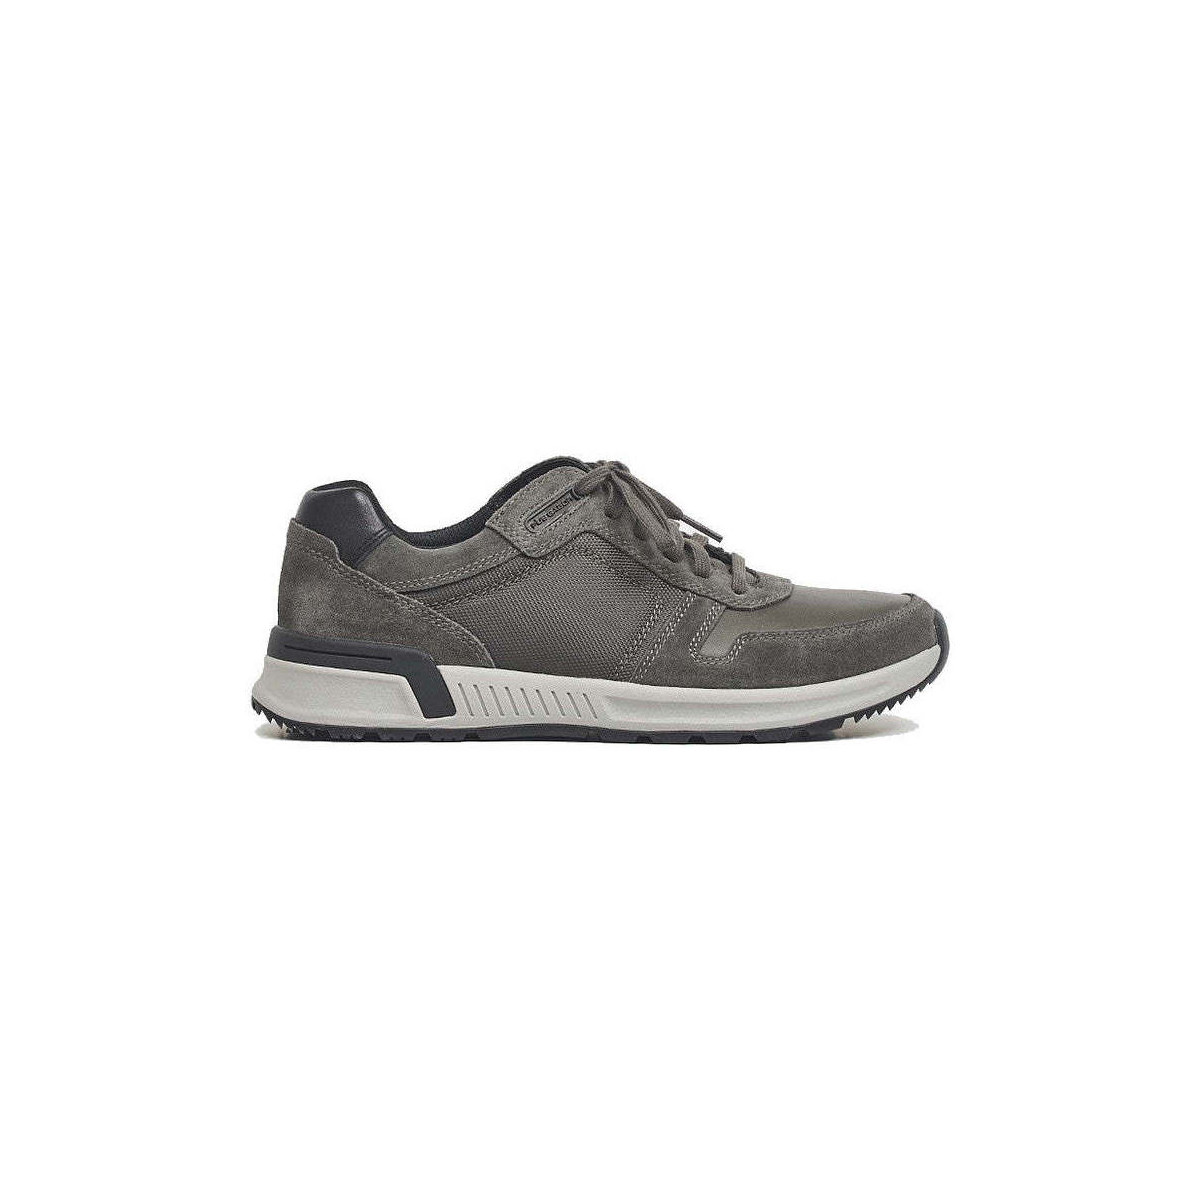 Chaussures Homme Baskets mode Pius Gabor 1007.10.03 Gris